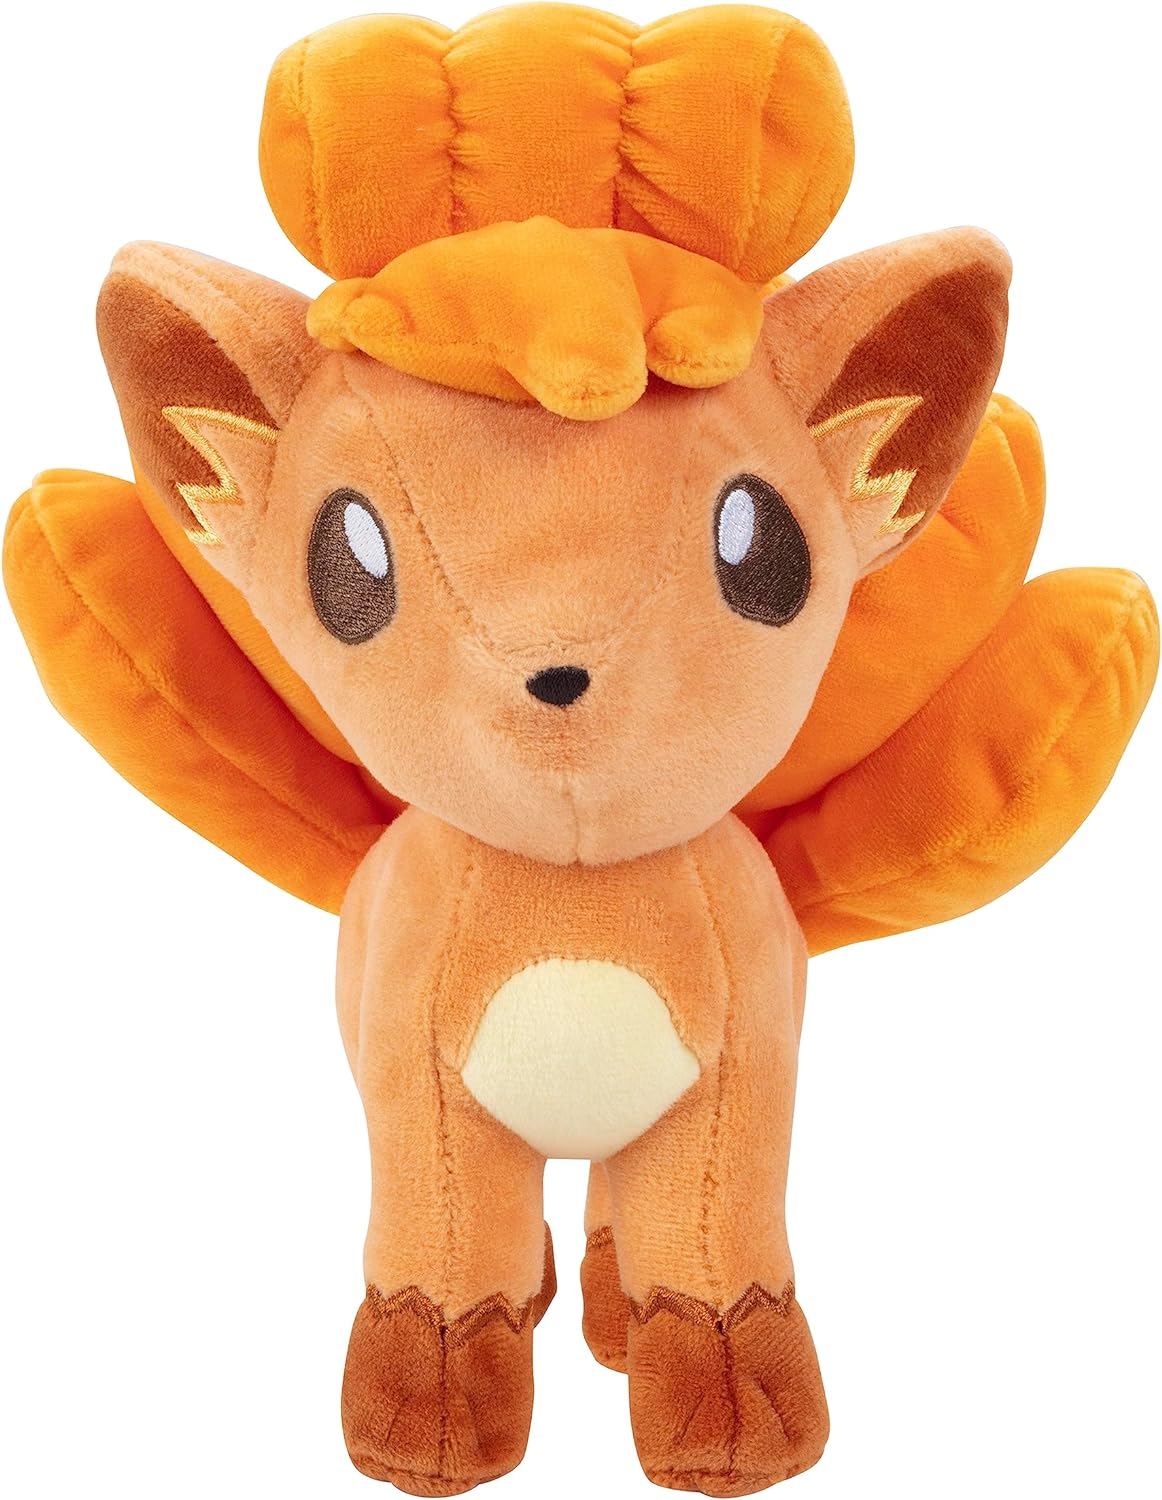 Pokémon Vulpix 6" Plush - Officially Licensed - Quality & Soft Stuffed Animal Toy - Generation One - Great Gift for Gift for Kids, Boys & Girls & Fans of Pokemon